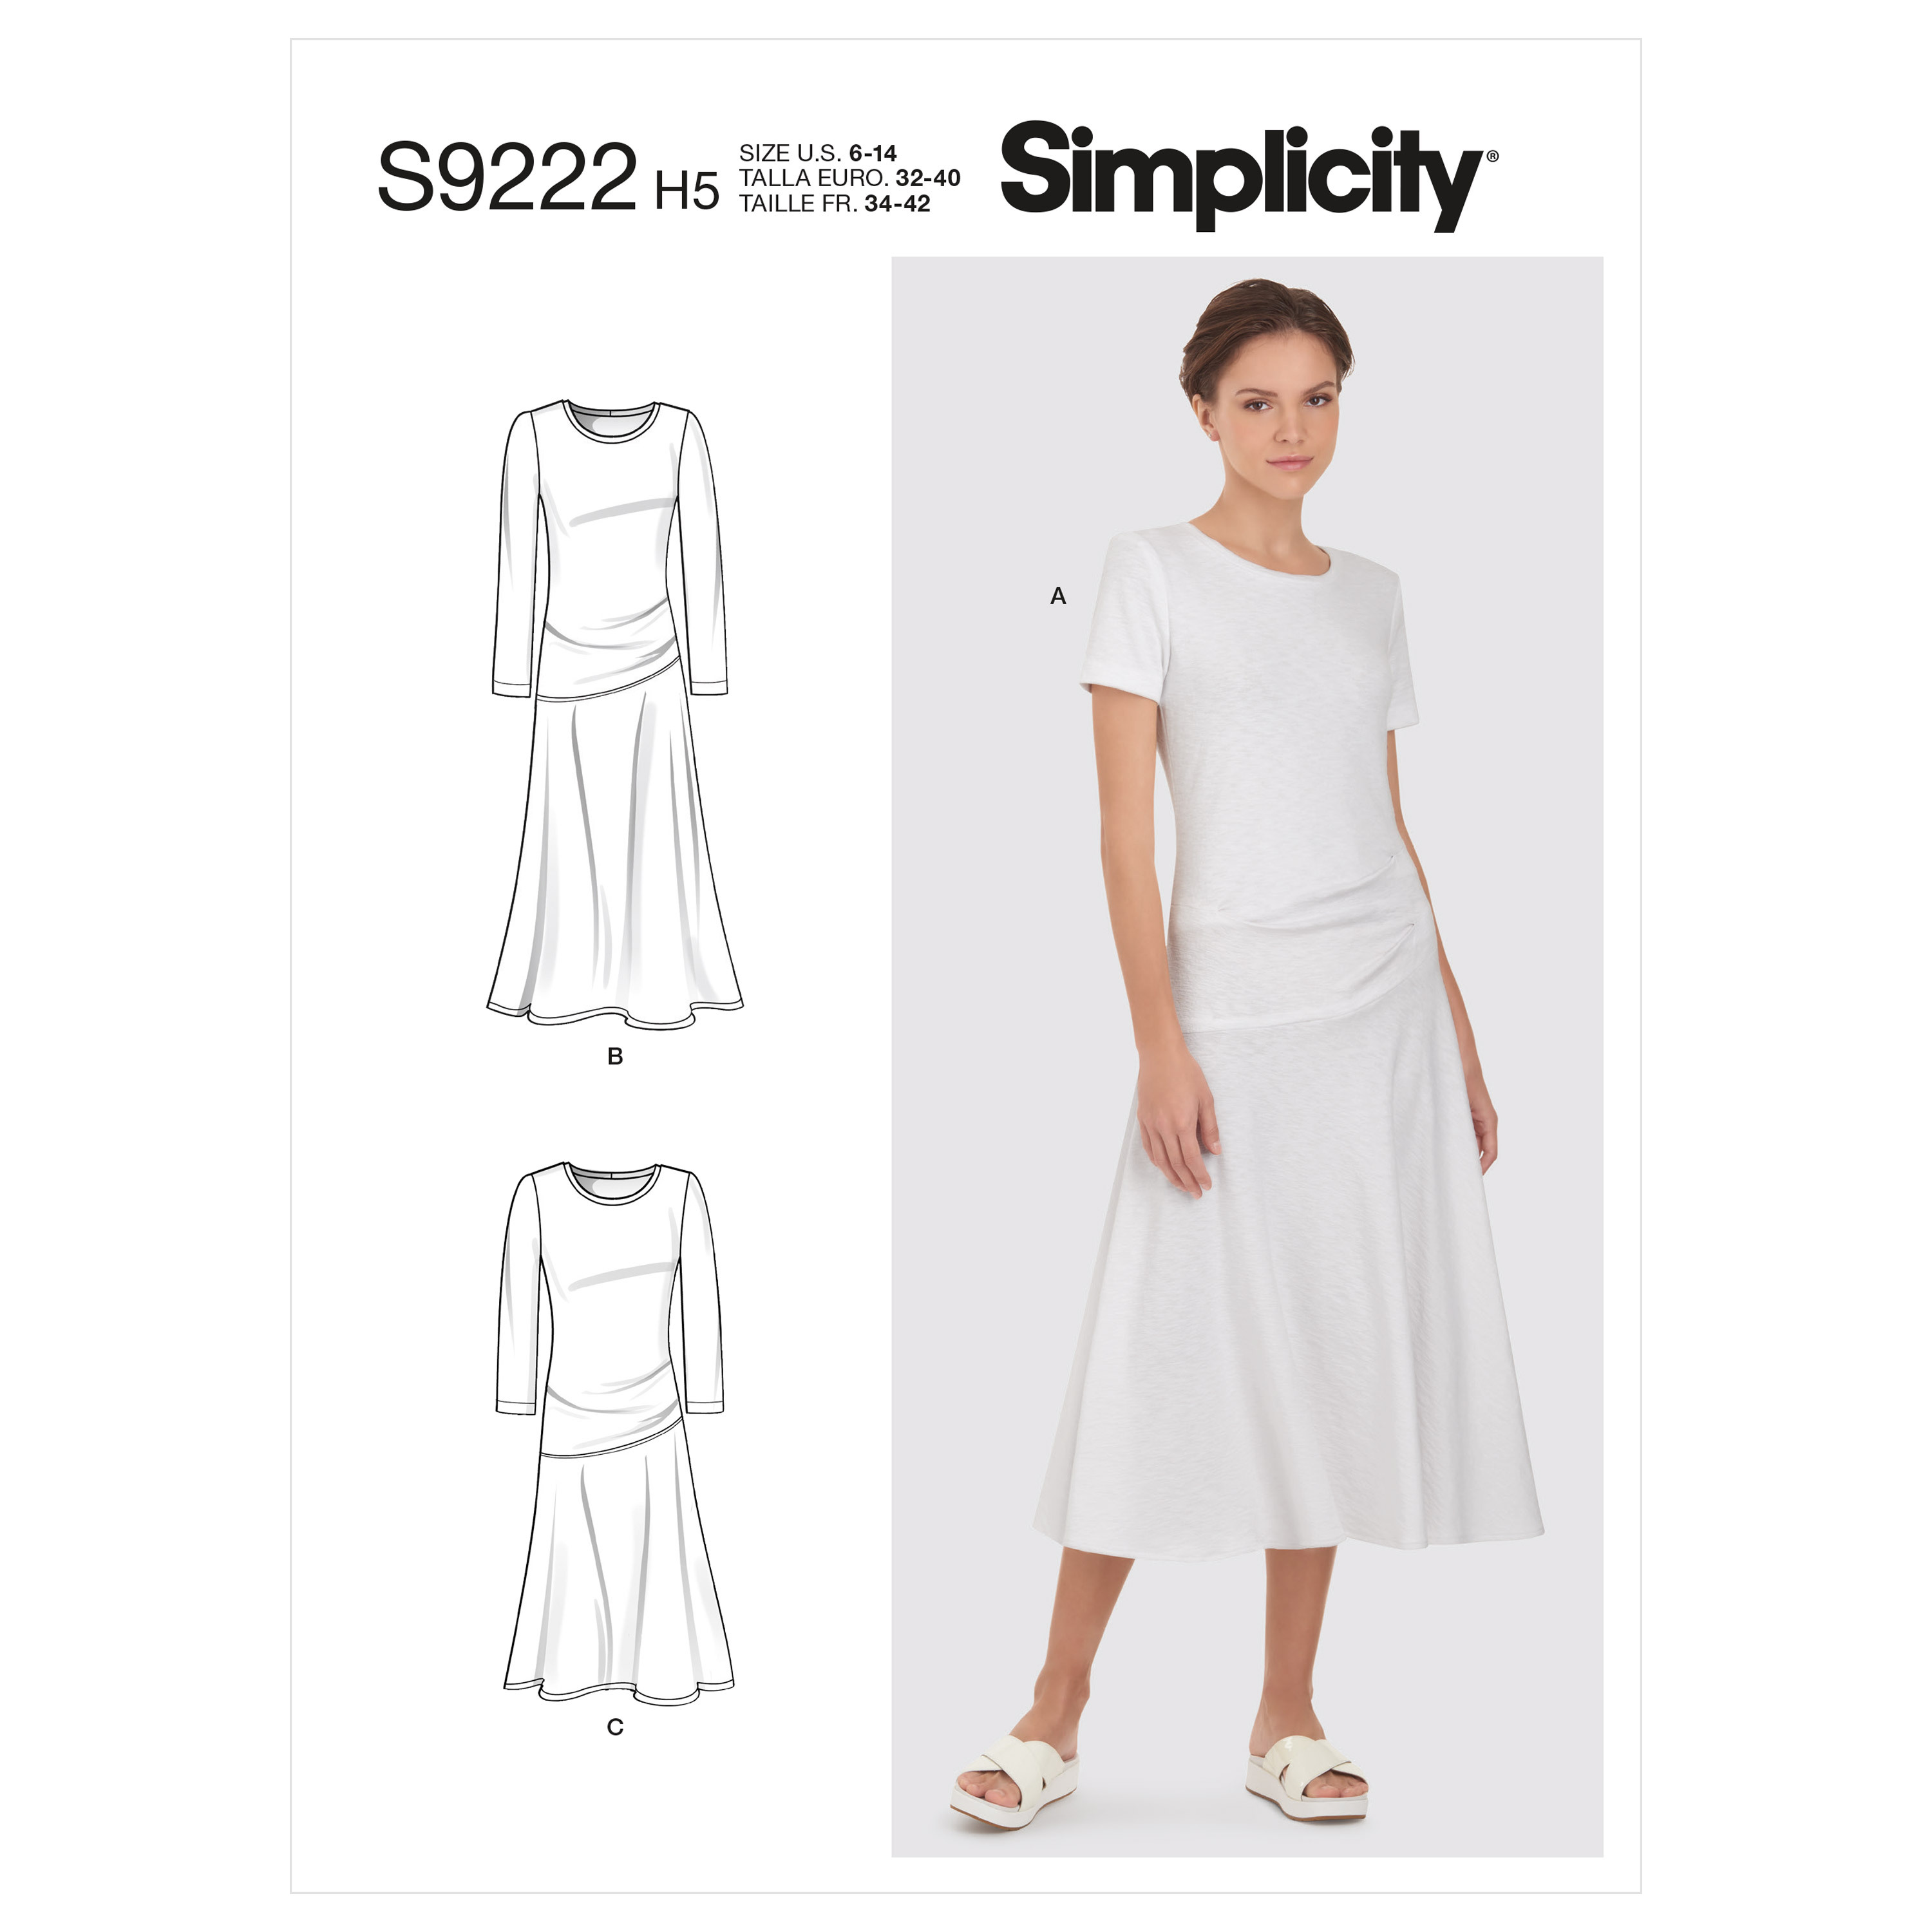 S9377, Simplicity Sewing Pattern Misses' Flared Skirts in Two Lengths